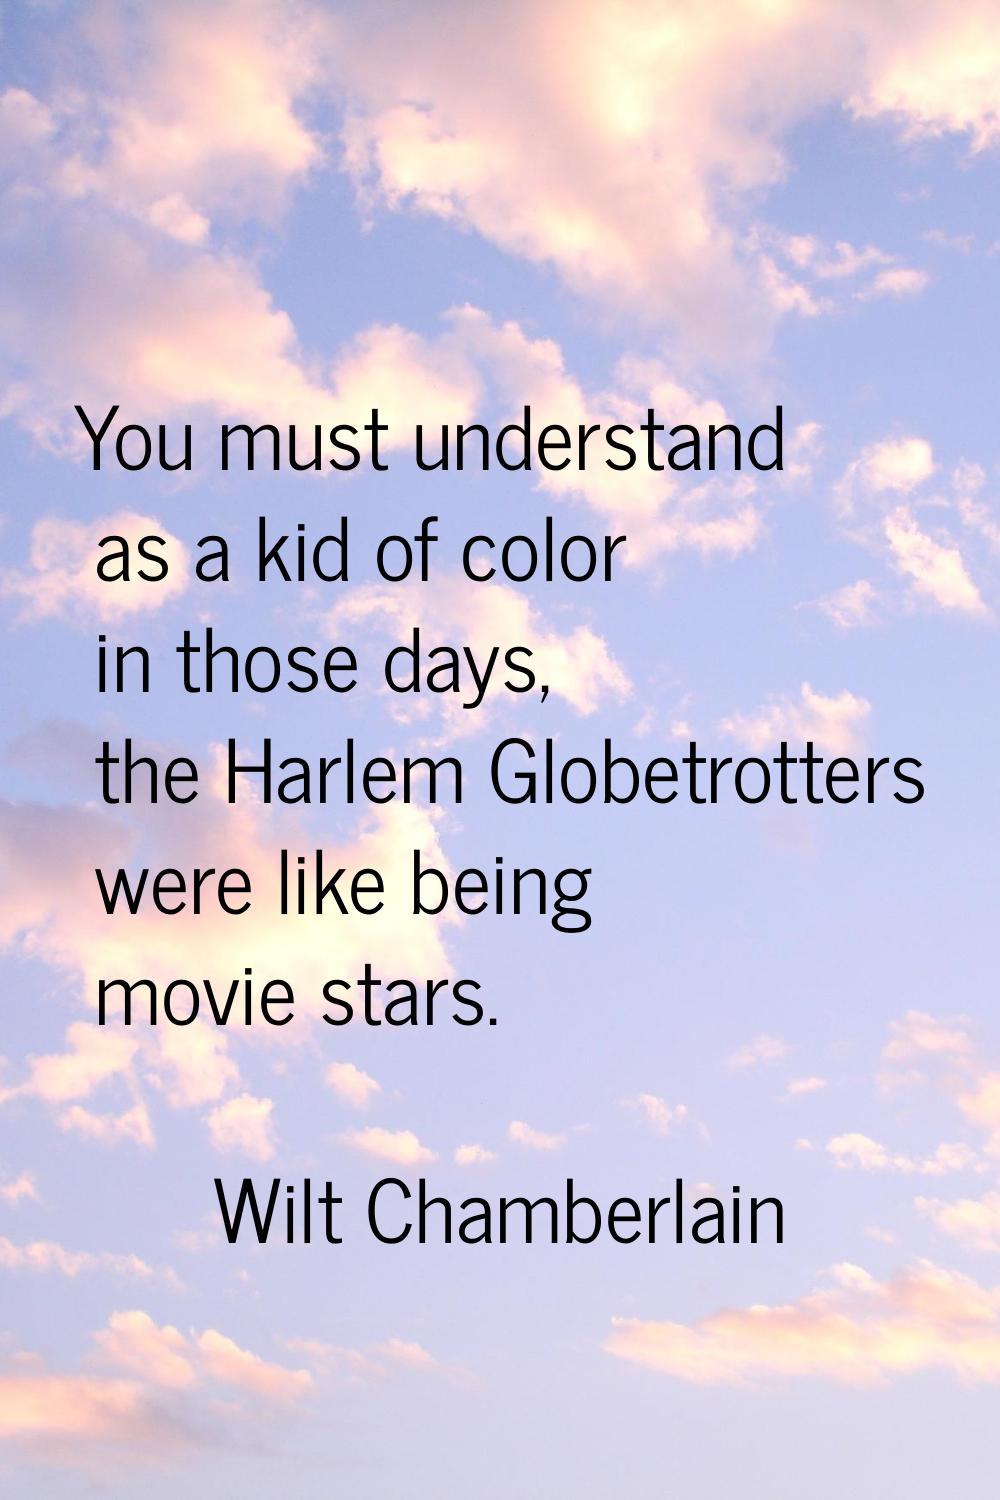 You must understand as a kid of color in those days, the Harlem Globetrotters were like being movie